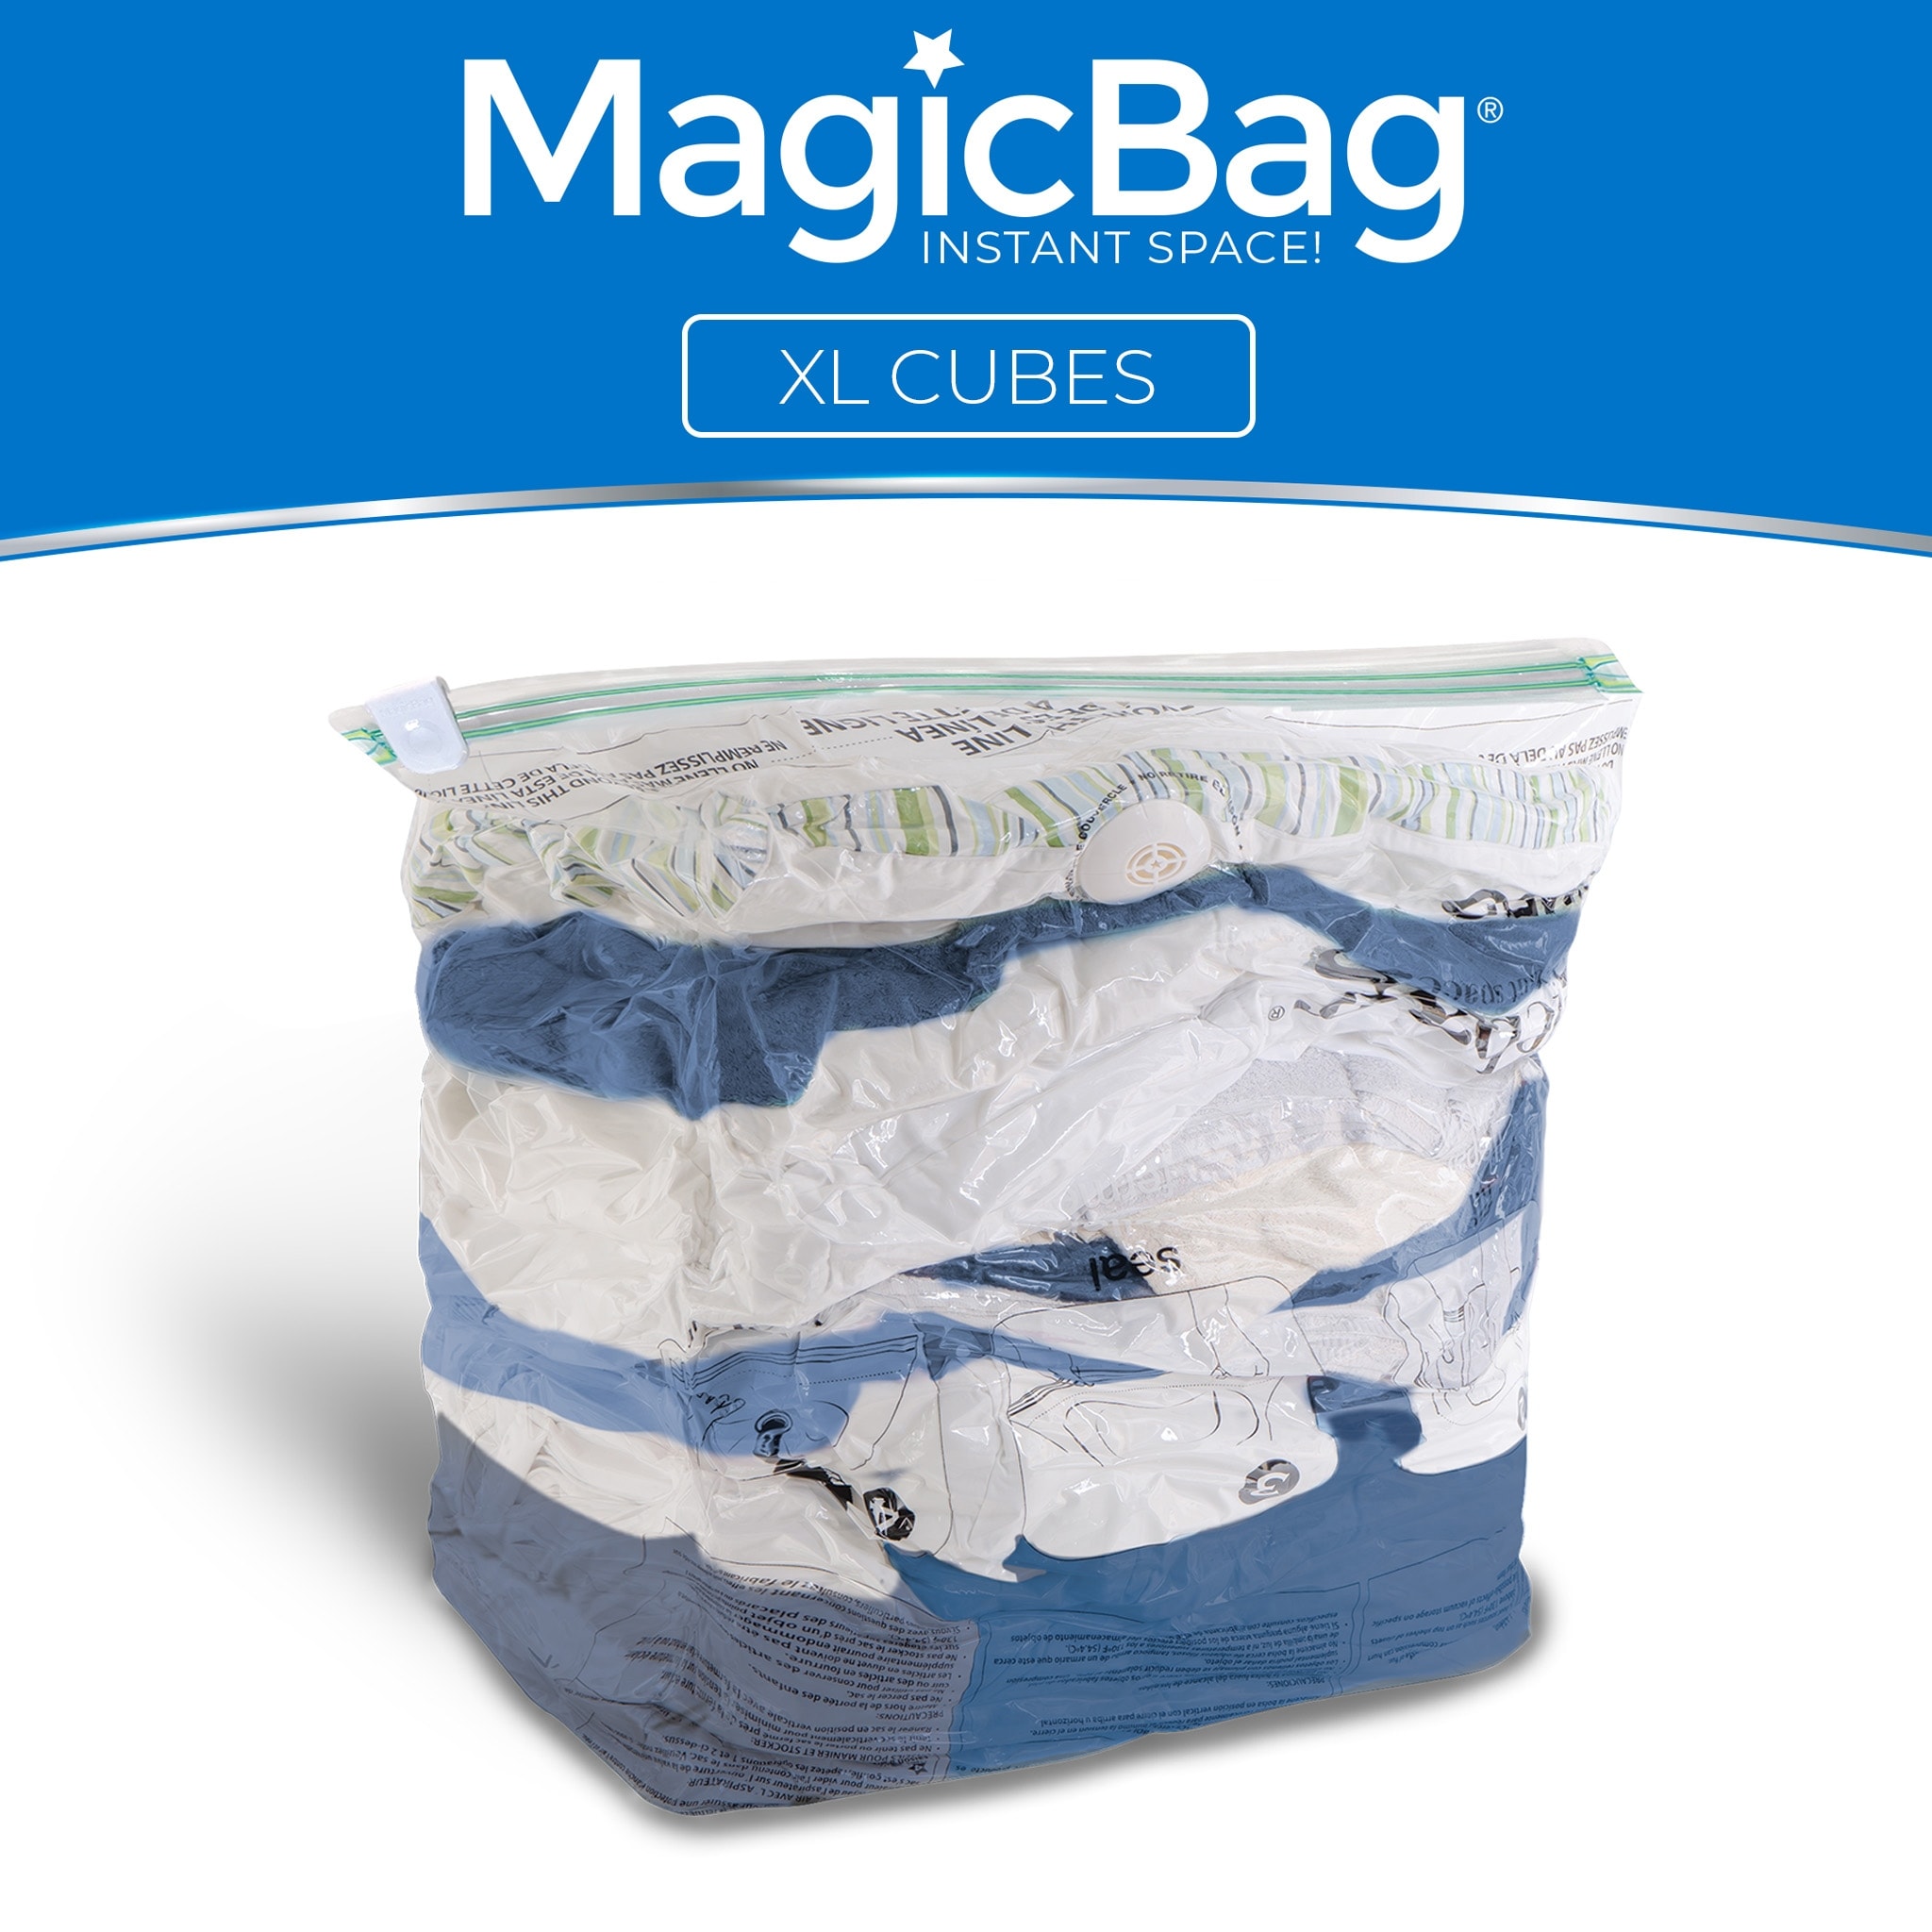 https://ak1.ostkcdn.com/images/products/is/images/direct/dc4809b9dd78466f82ac6dc8b7f26aa9b2500542/MagicBag-Smart-Design-Instant-Space-Saver-Storage---Cube-Extra-Large---Set-of-4-Bags-Total.jpg